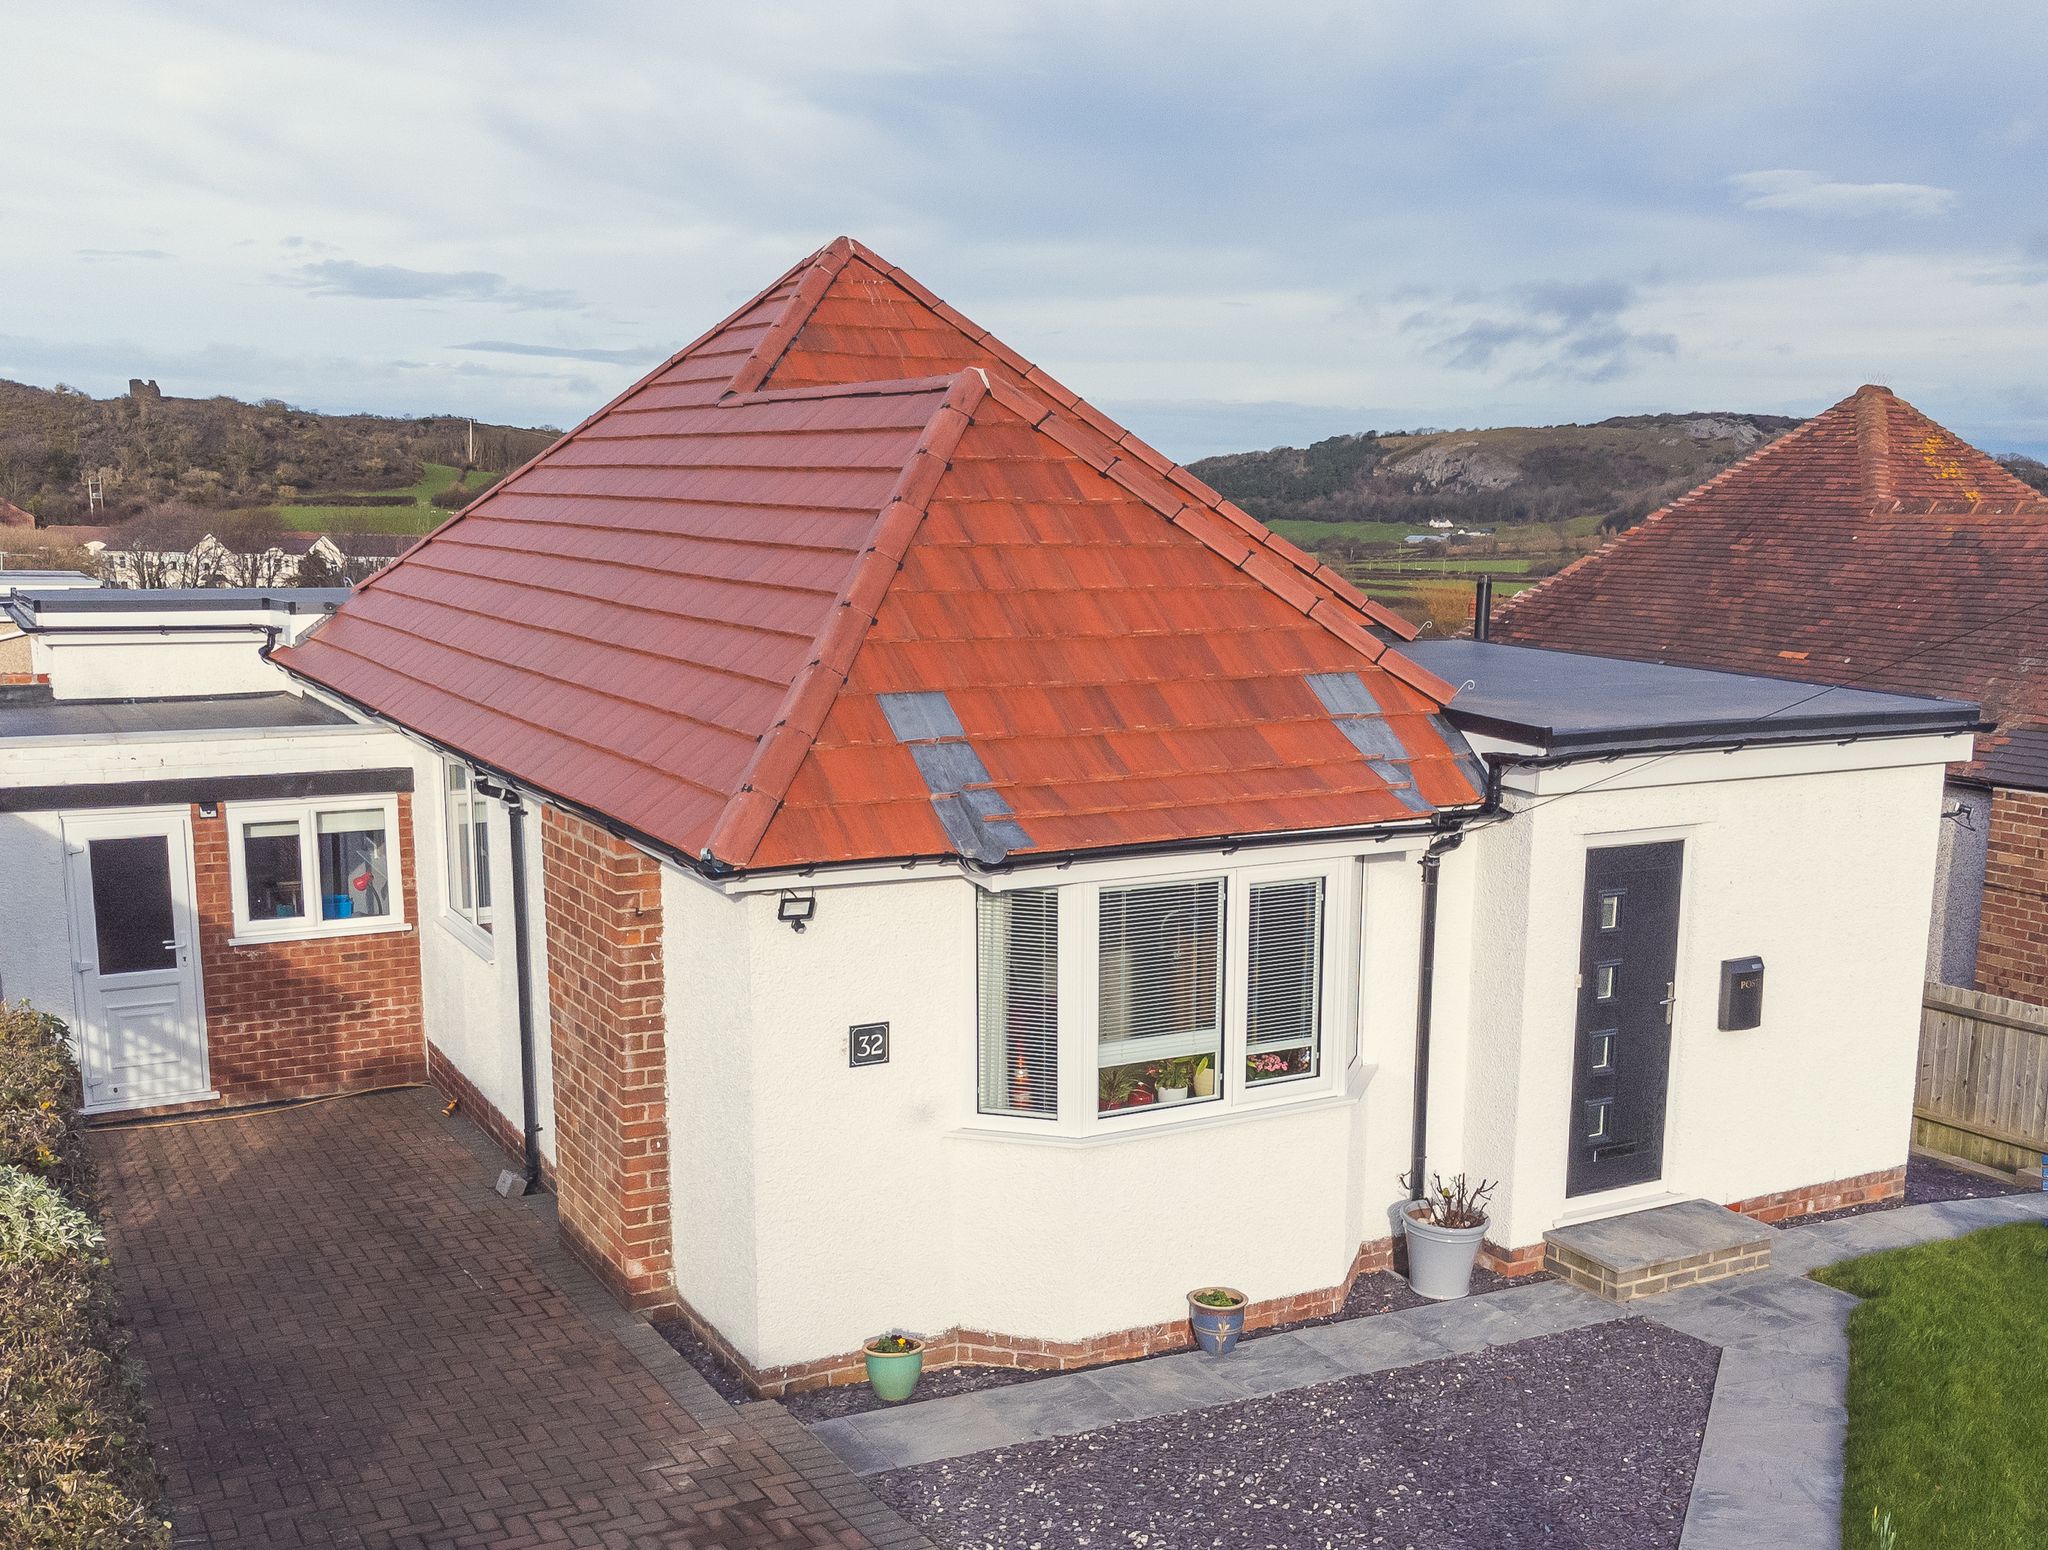 Tile Roof Contractors Porth Swtan, LL65 - DD Roofing